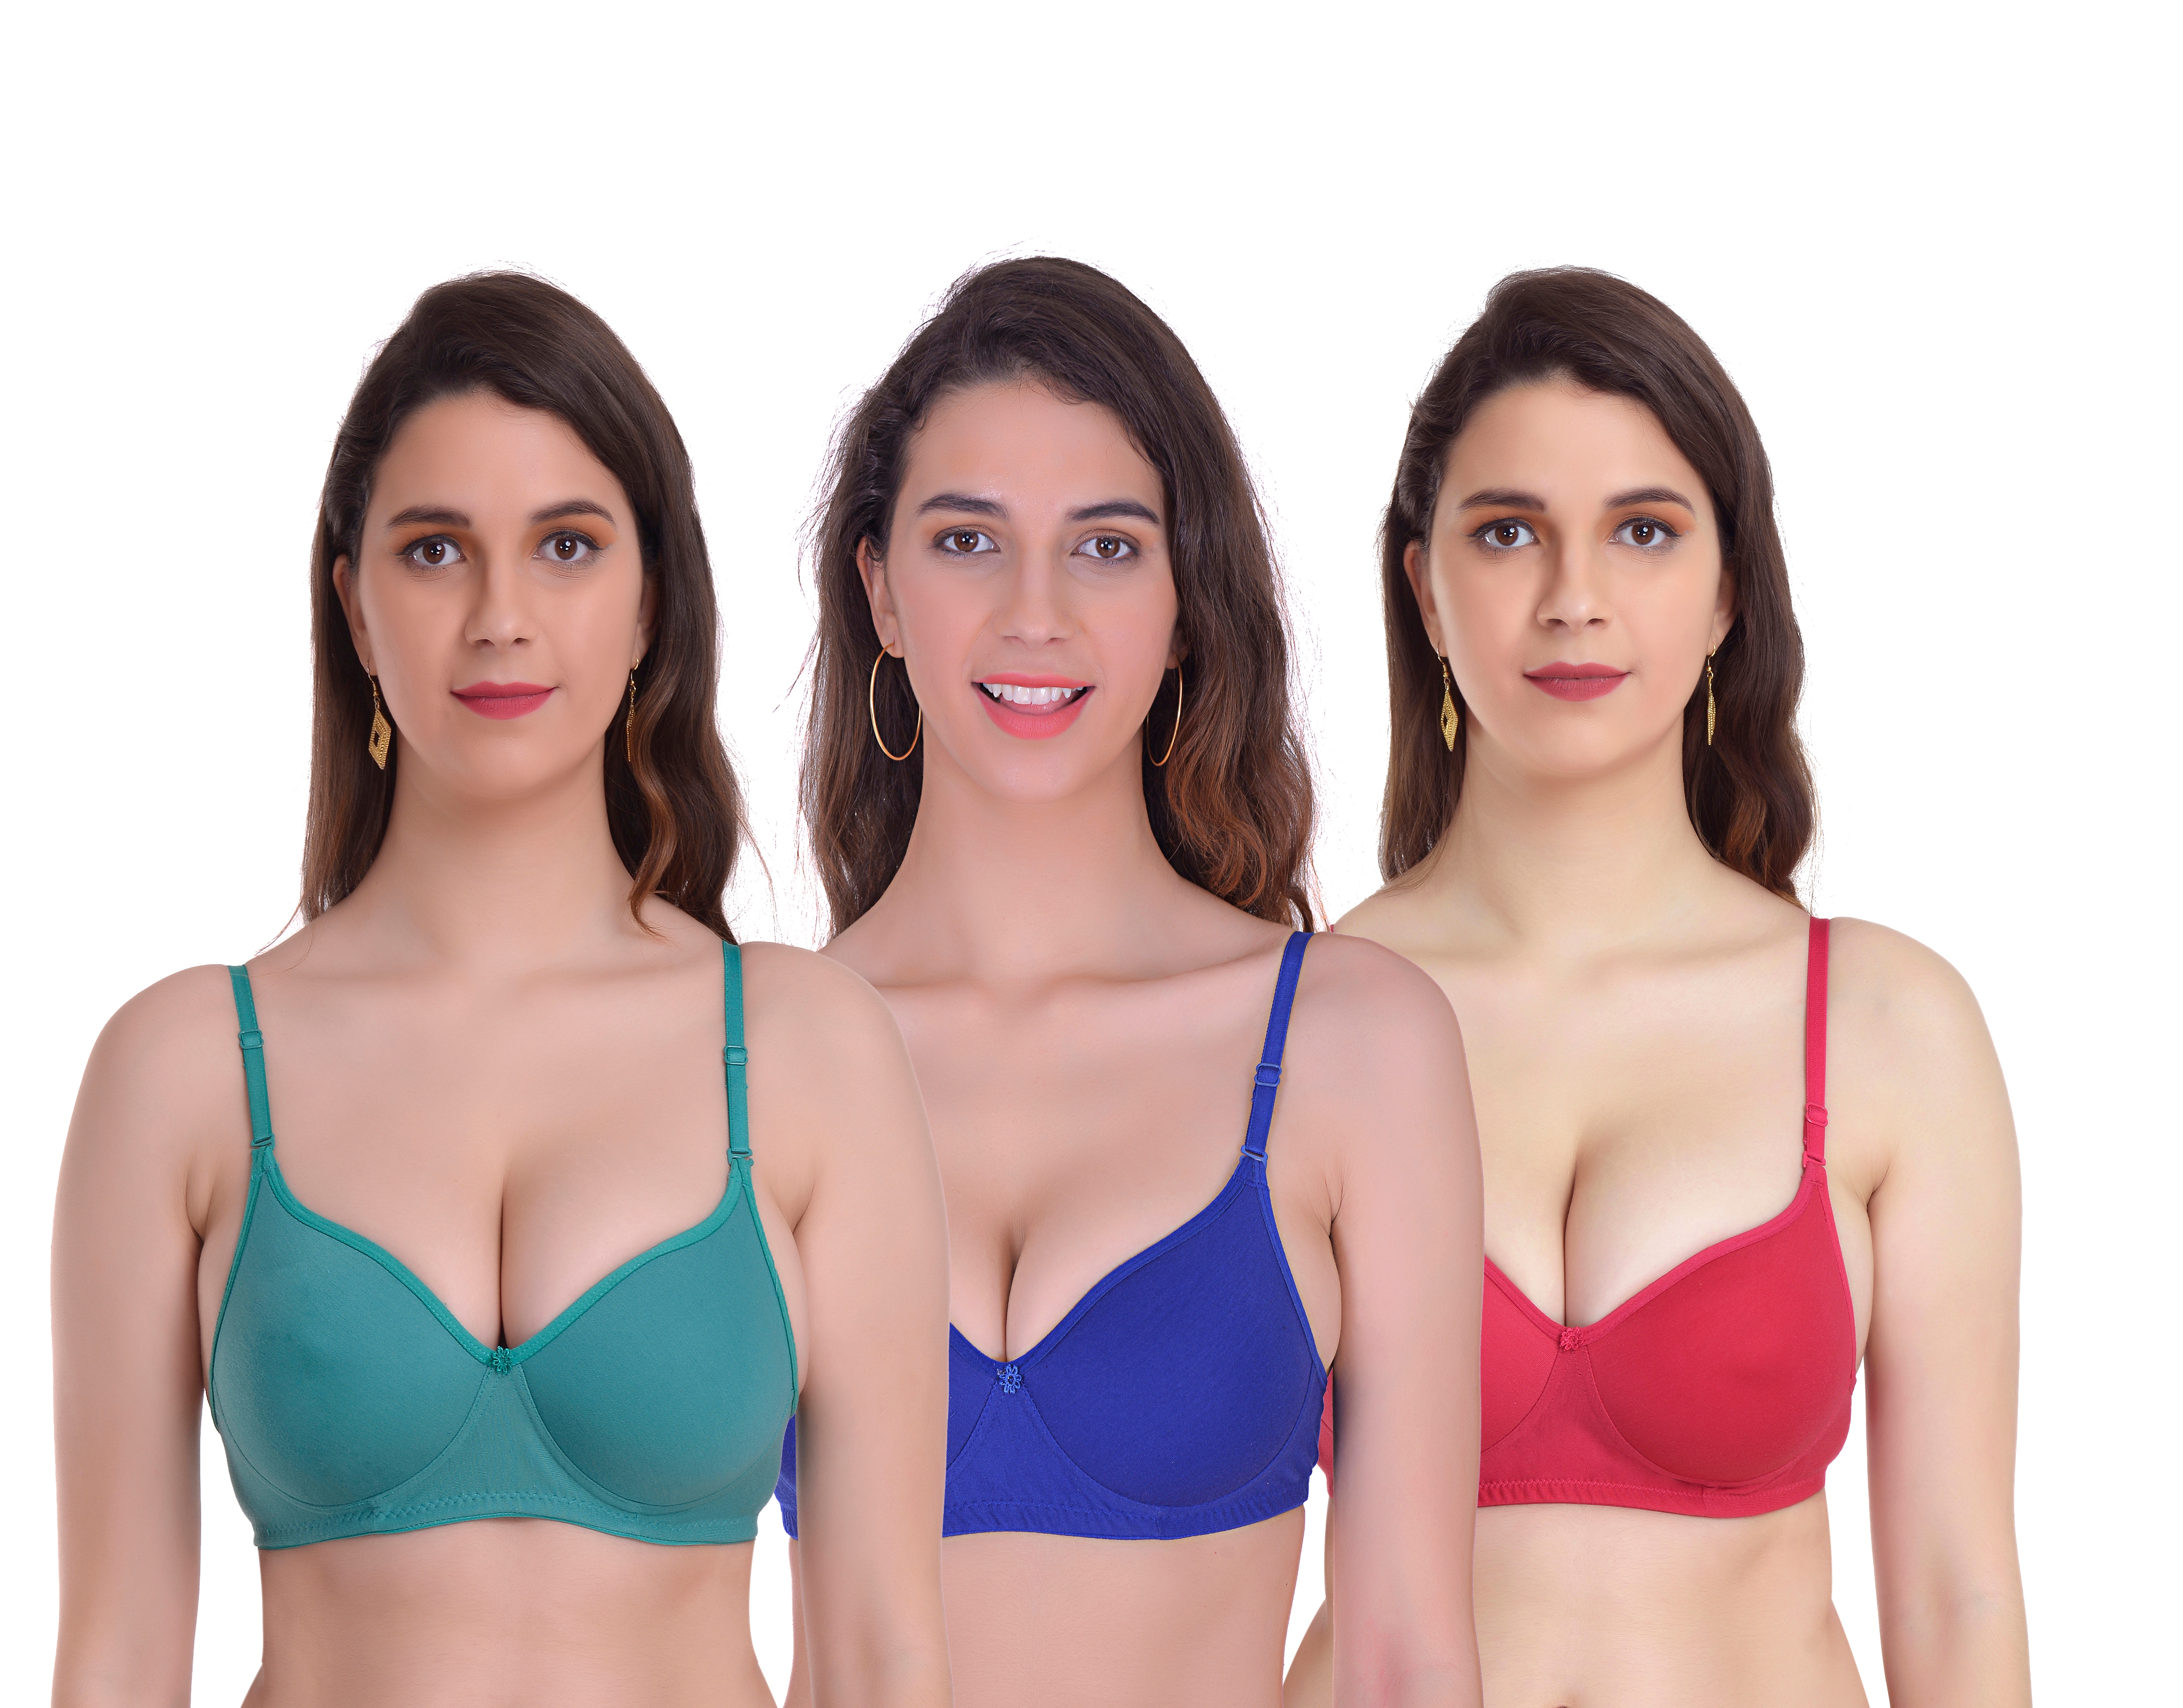 Mynte Women's Cotton Rich Lightly Padded Non-Wired Full Cup Regular Bra (Pack of 3) (Green/Blue/Pink,30) (MY-CPPB-7GBLHR-30)